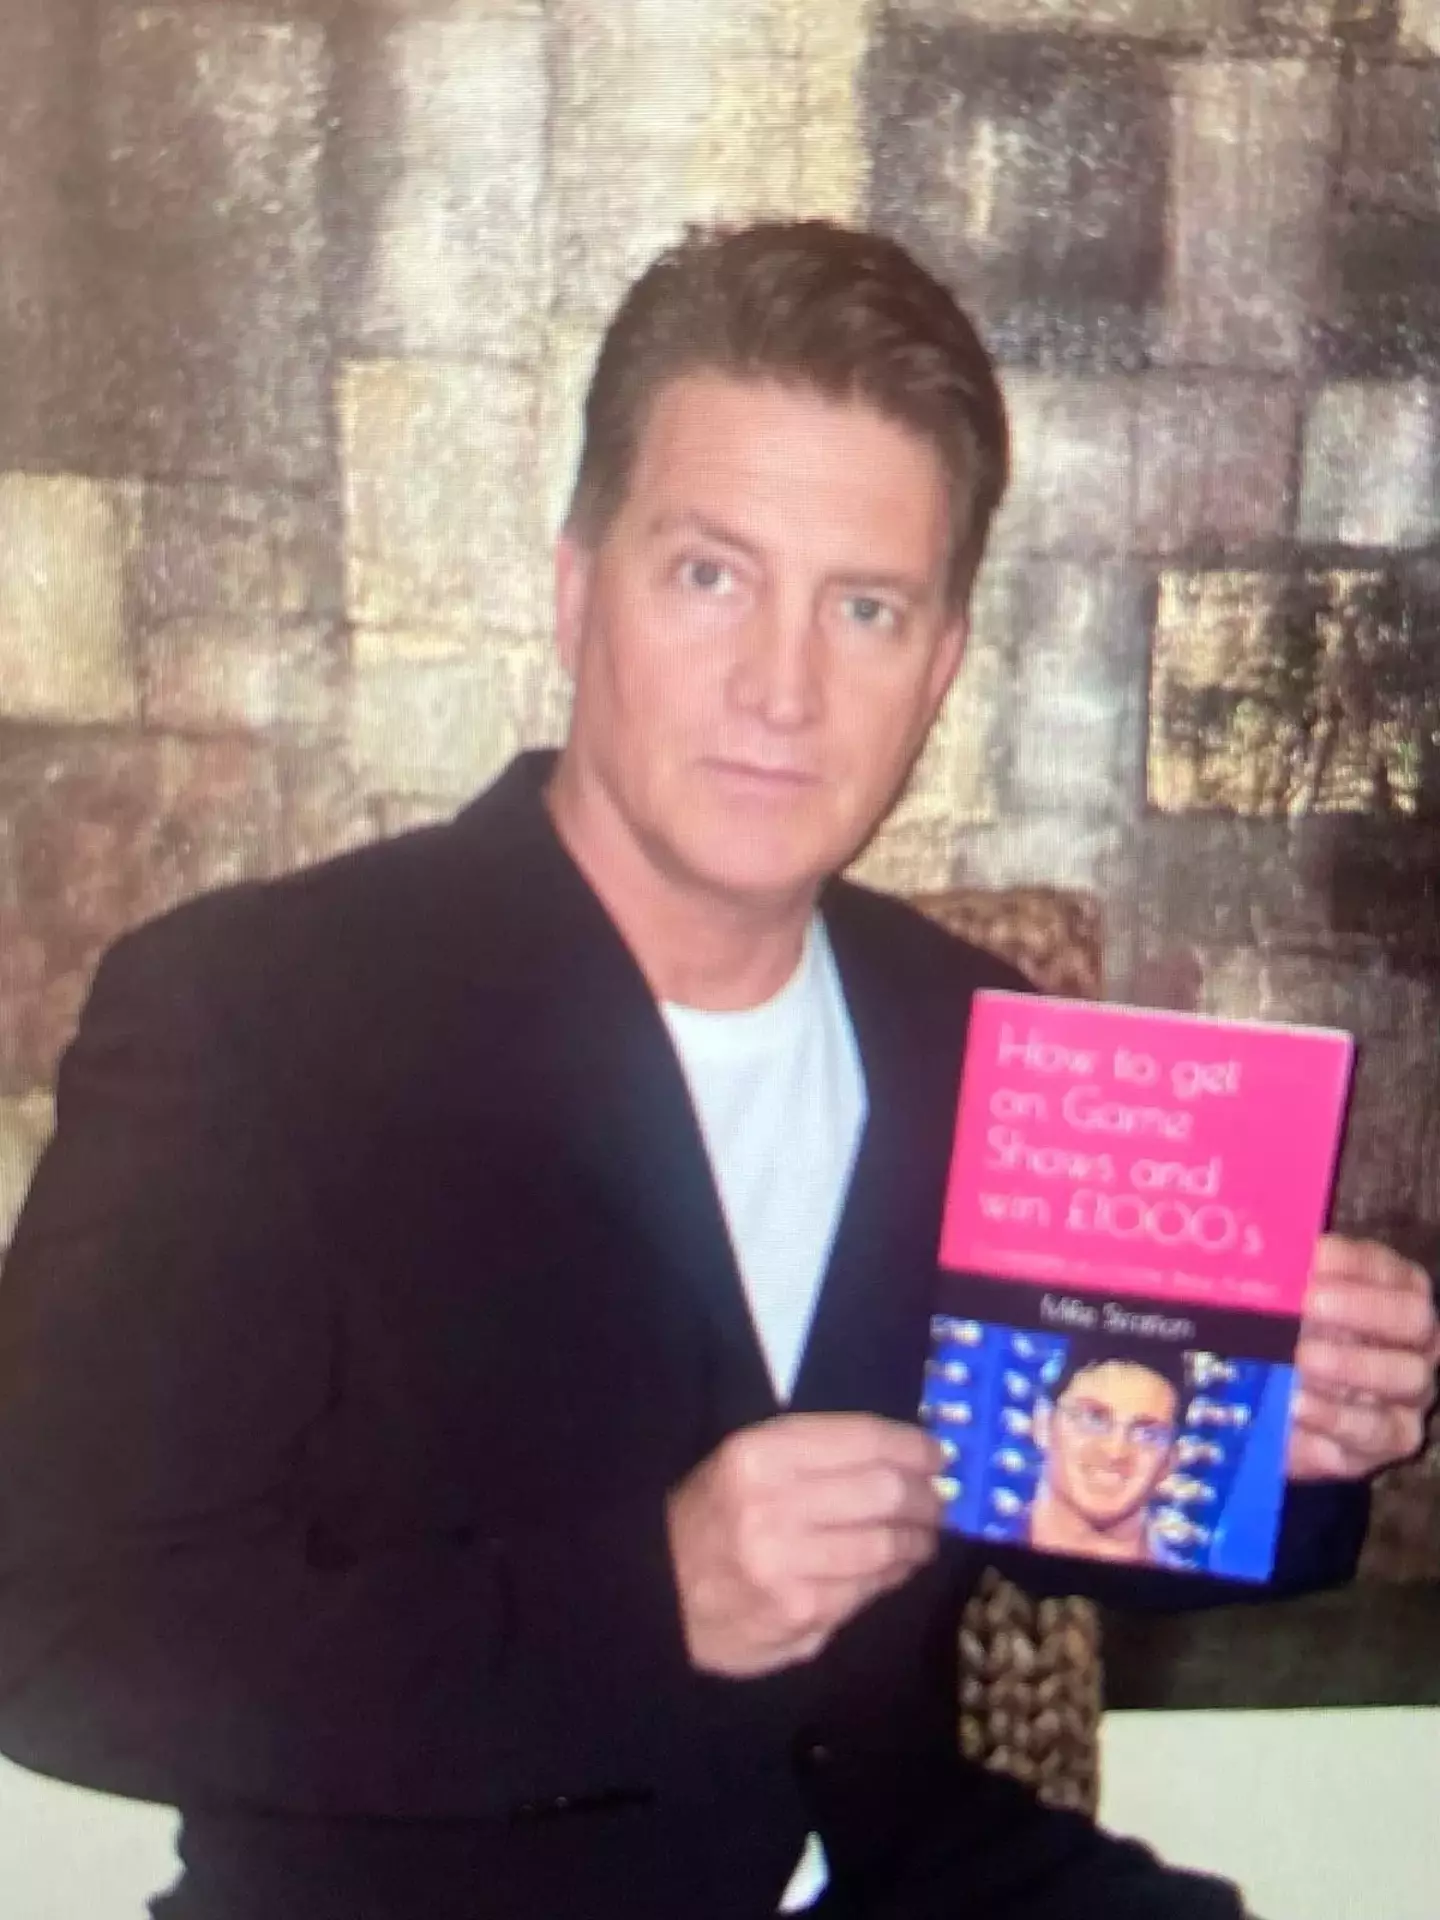 Mike has now written a book detailing all of his tips and tricks for game show success.